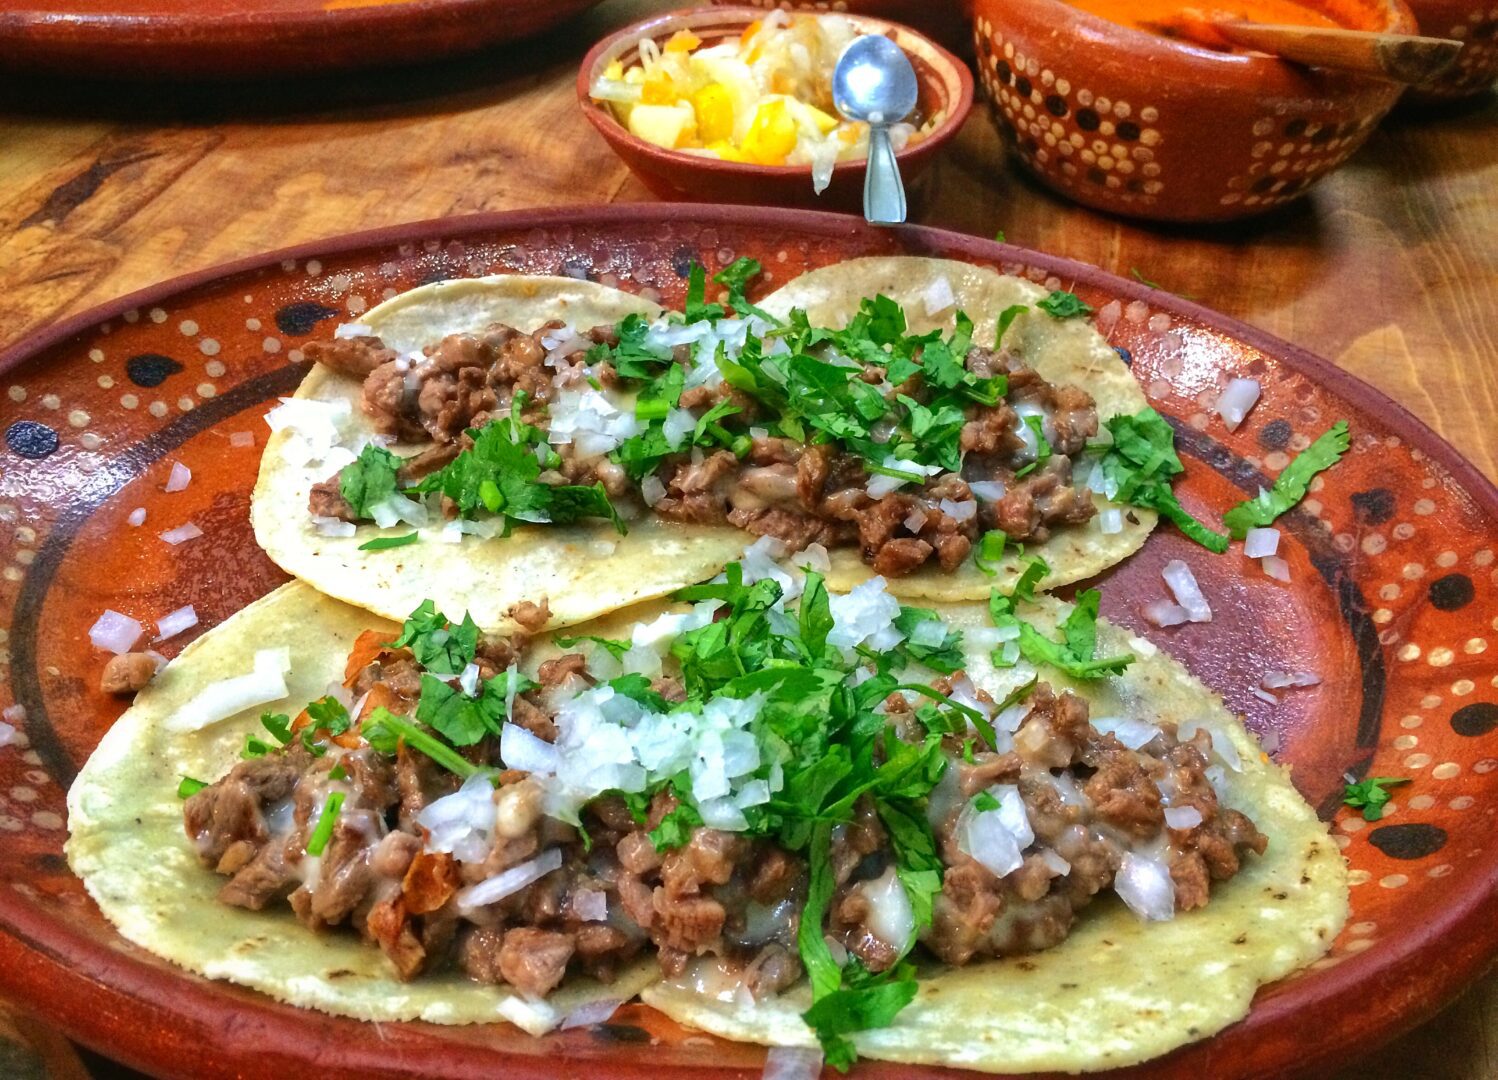 Two tacos on a plate with onions and cilantro.